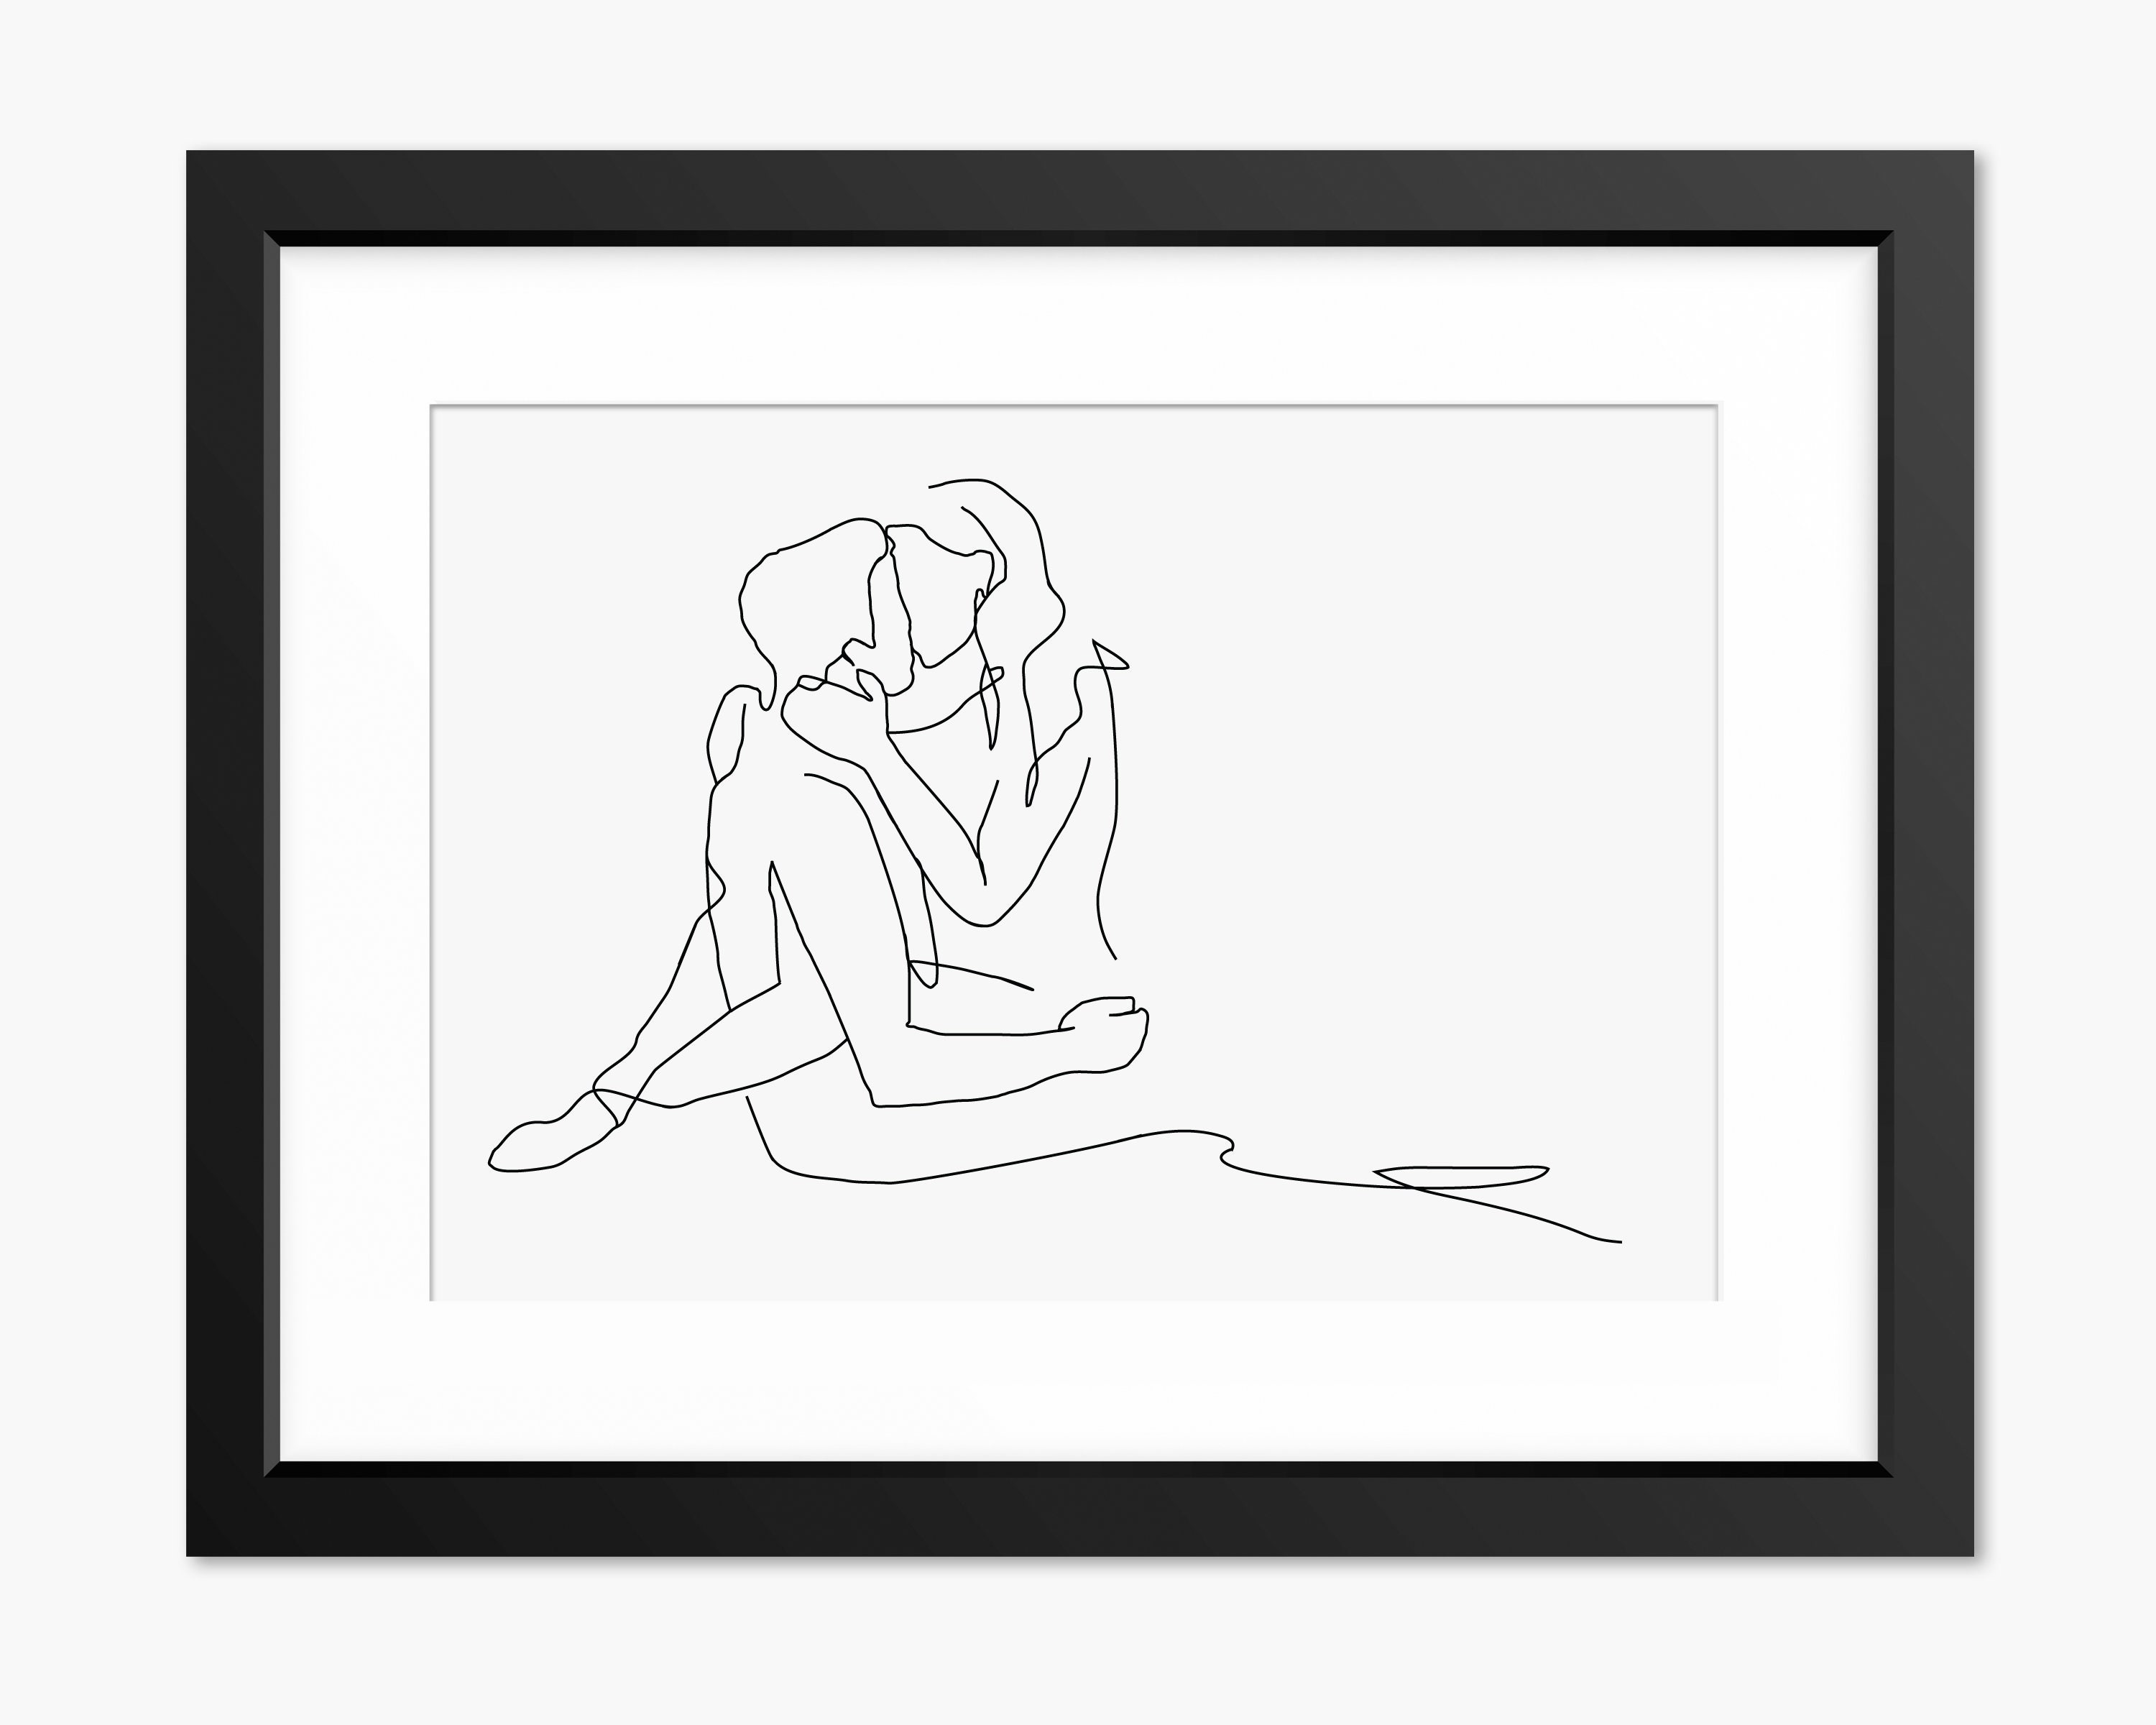 Discover 137+ intimate sketches super hot